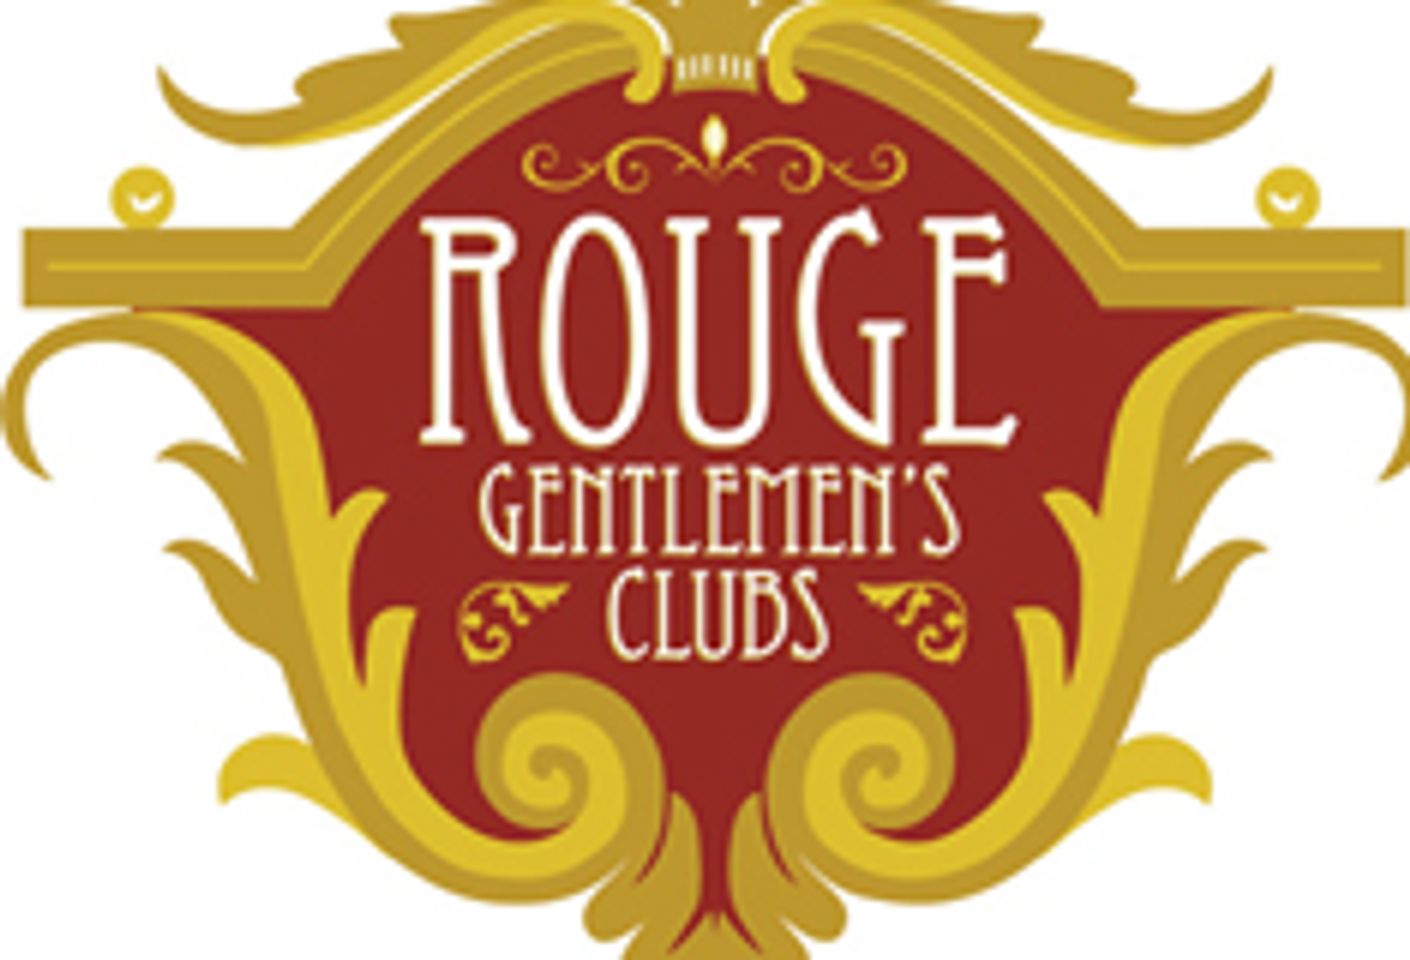 Nico Sirianni Promoted to GM of Rouge Gentlemen's Club L.A.